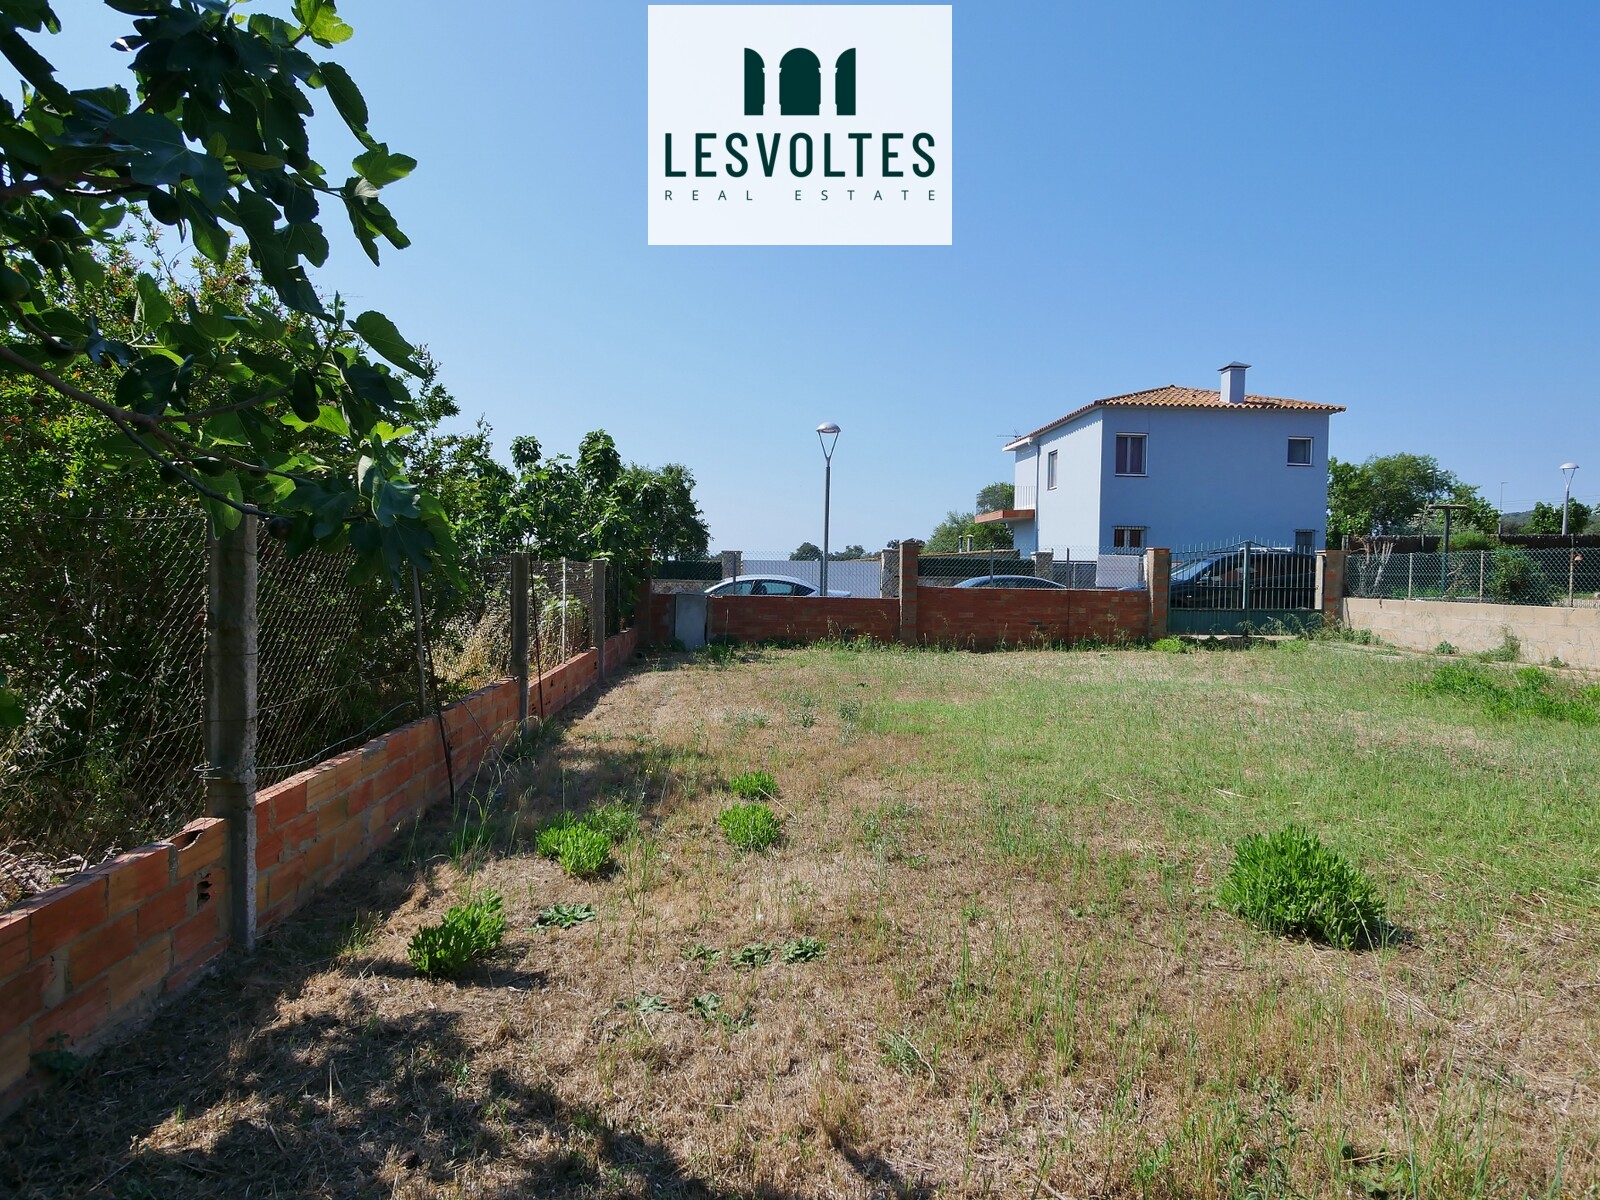 SINGLE FAMILY HOUSE ON THE GROUND FLOOR WITH LARGE GARDEN FOR SALE IN MONTRÀS. PROPERTY WITH MANY POSSIBILITIES WITH MINIMAL 